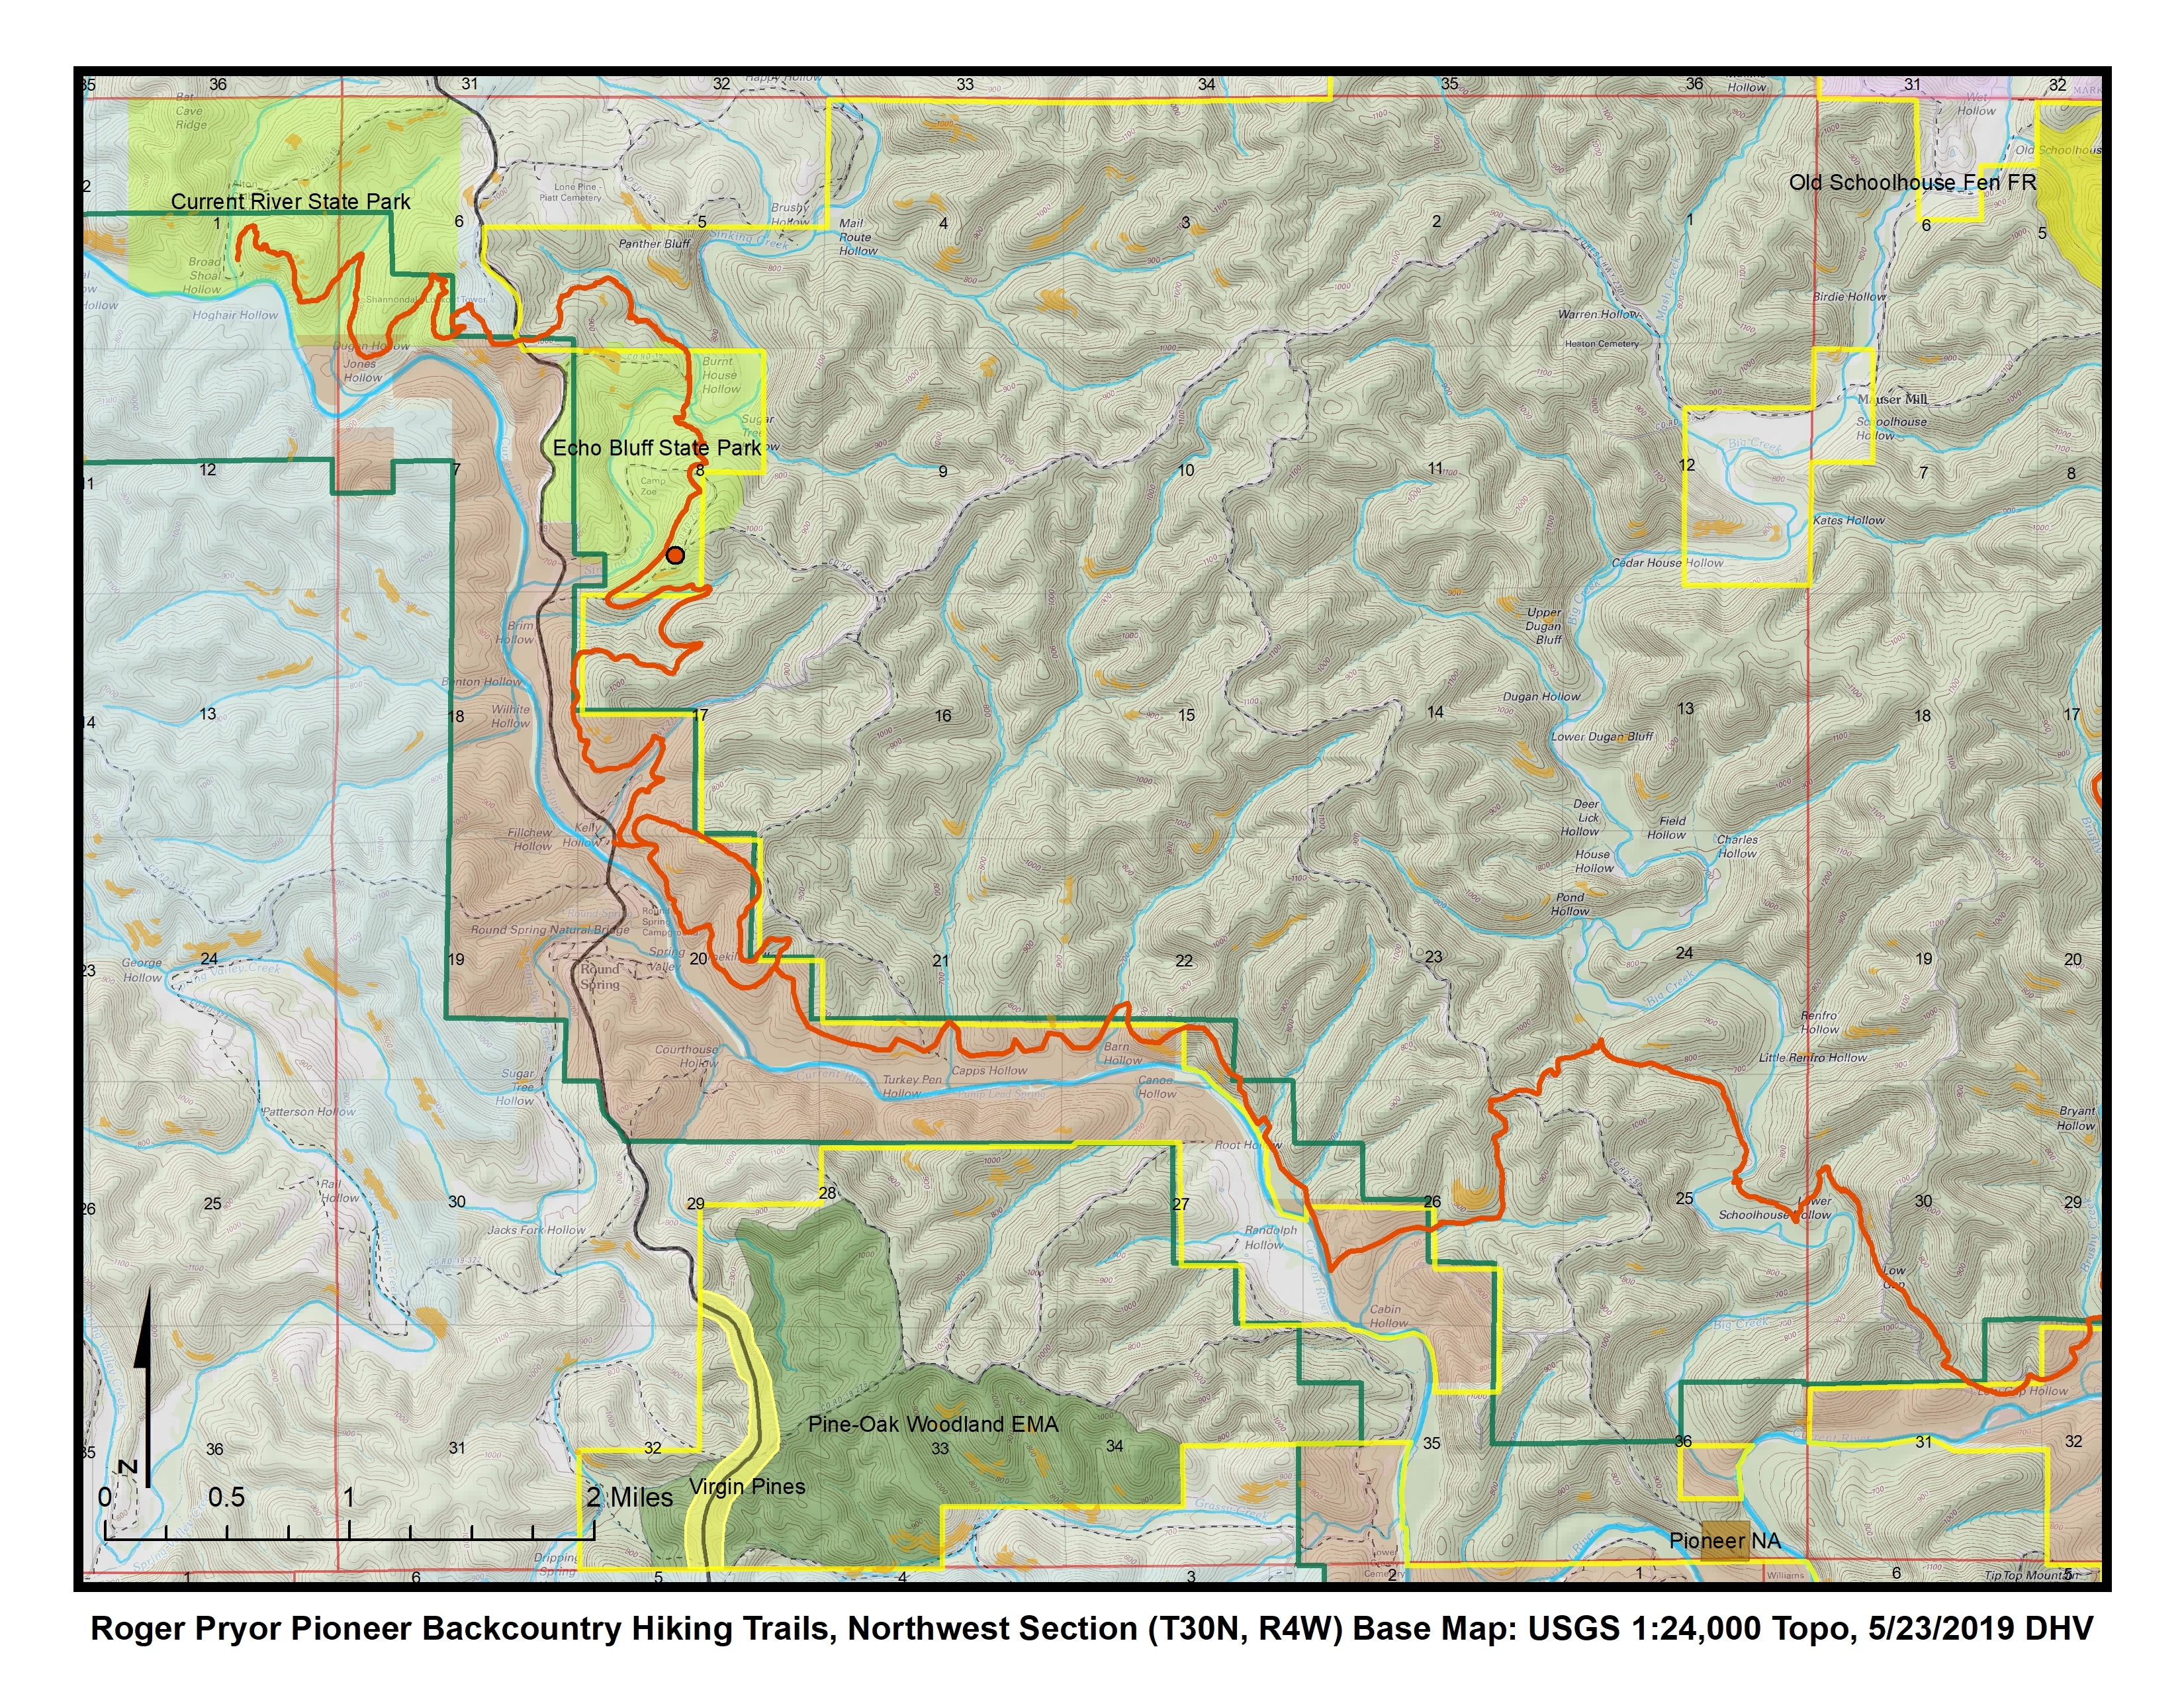 Current River Trail map showing northwest part of Pioneer Backcountry trail